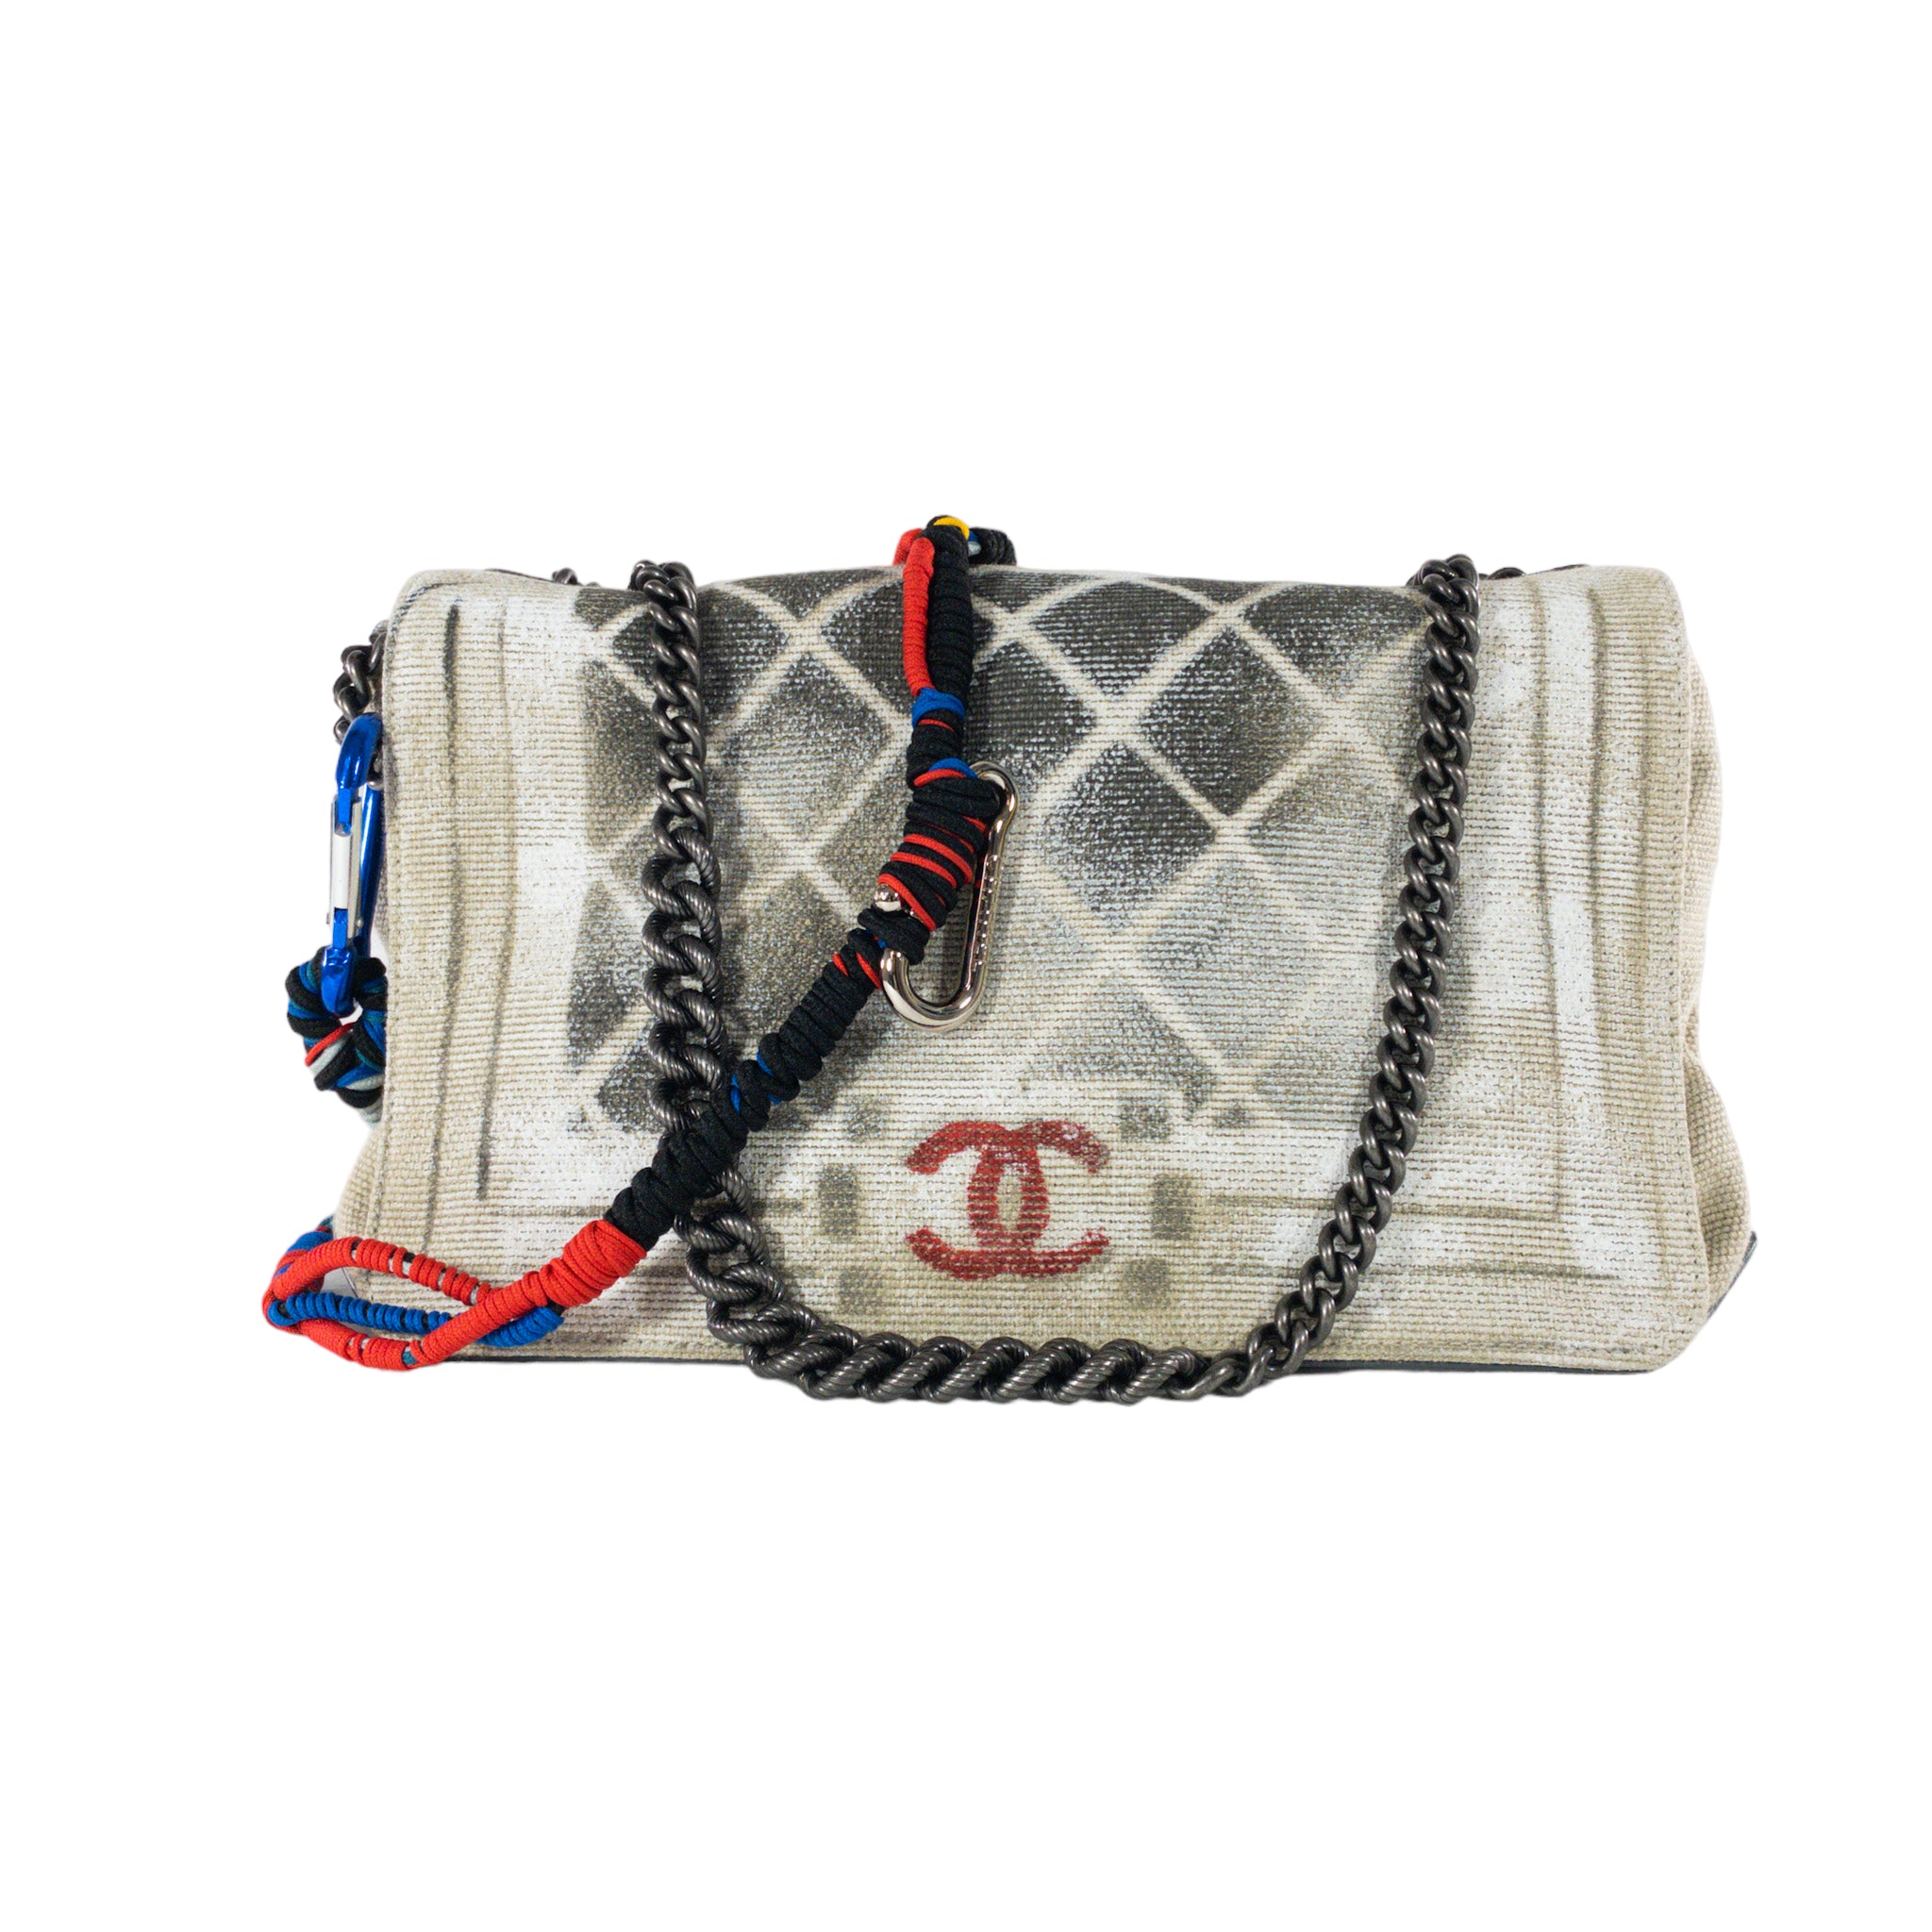 Chanel Ready To Wear Spring 2014  Chanel bag, Chanel spring, Chanel canvas  bag